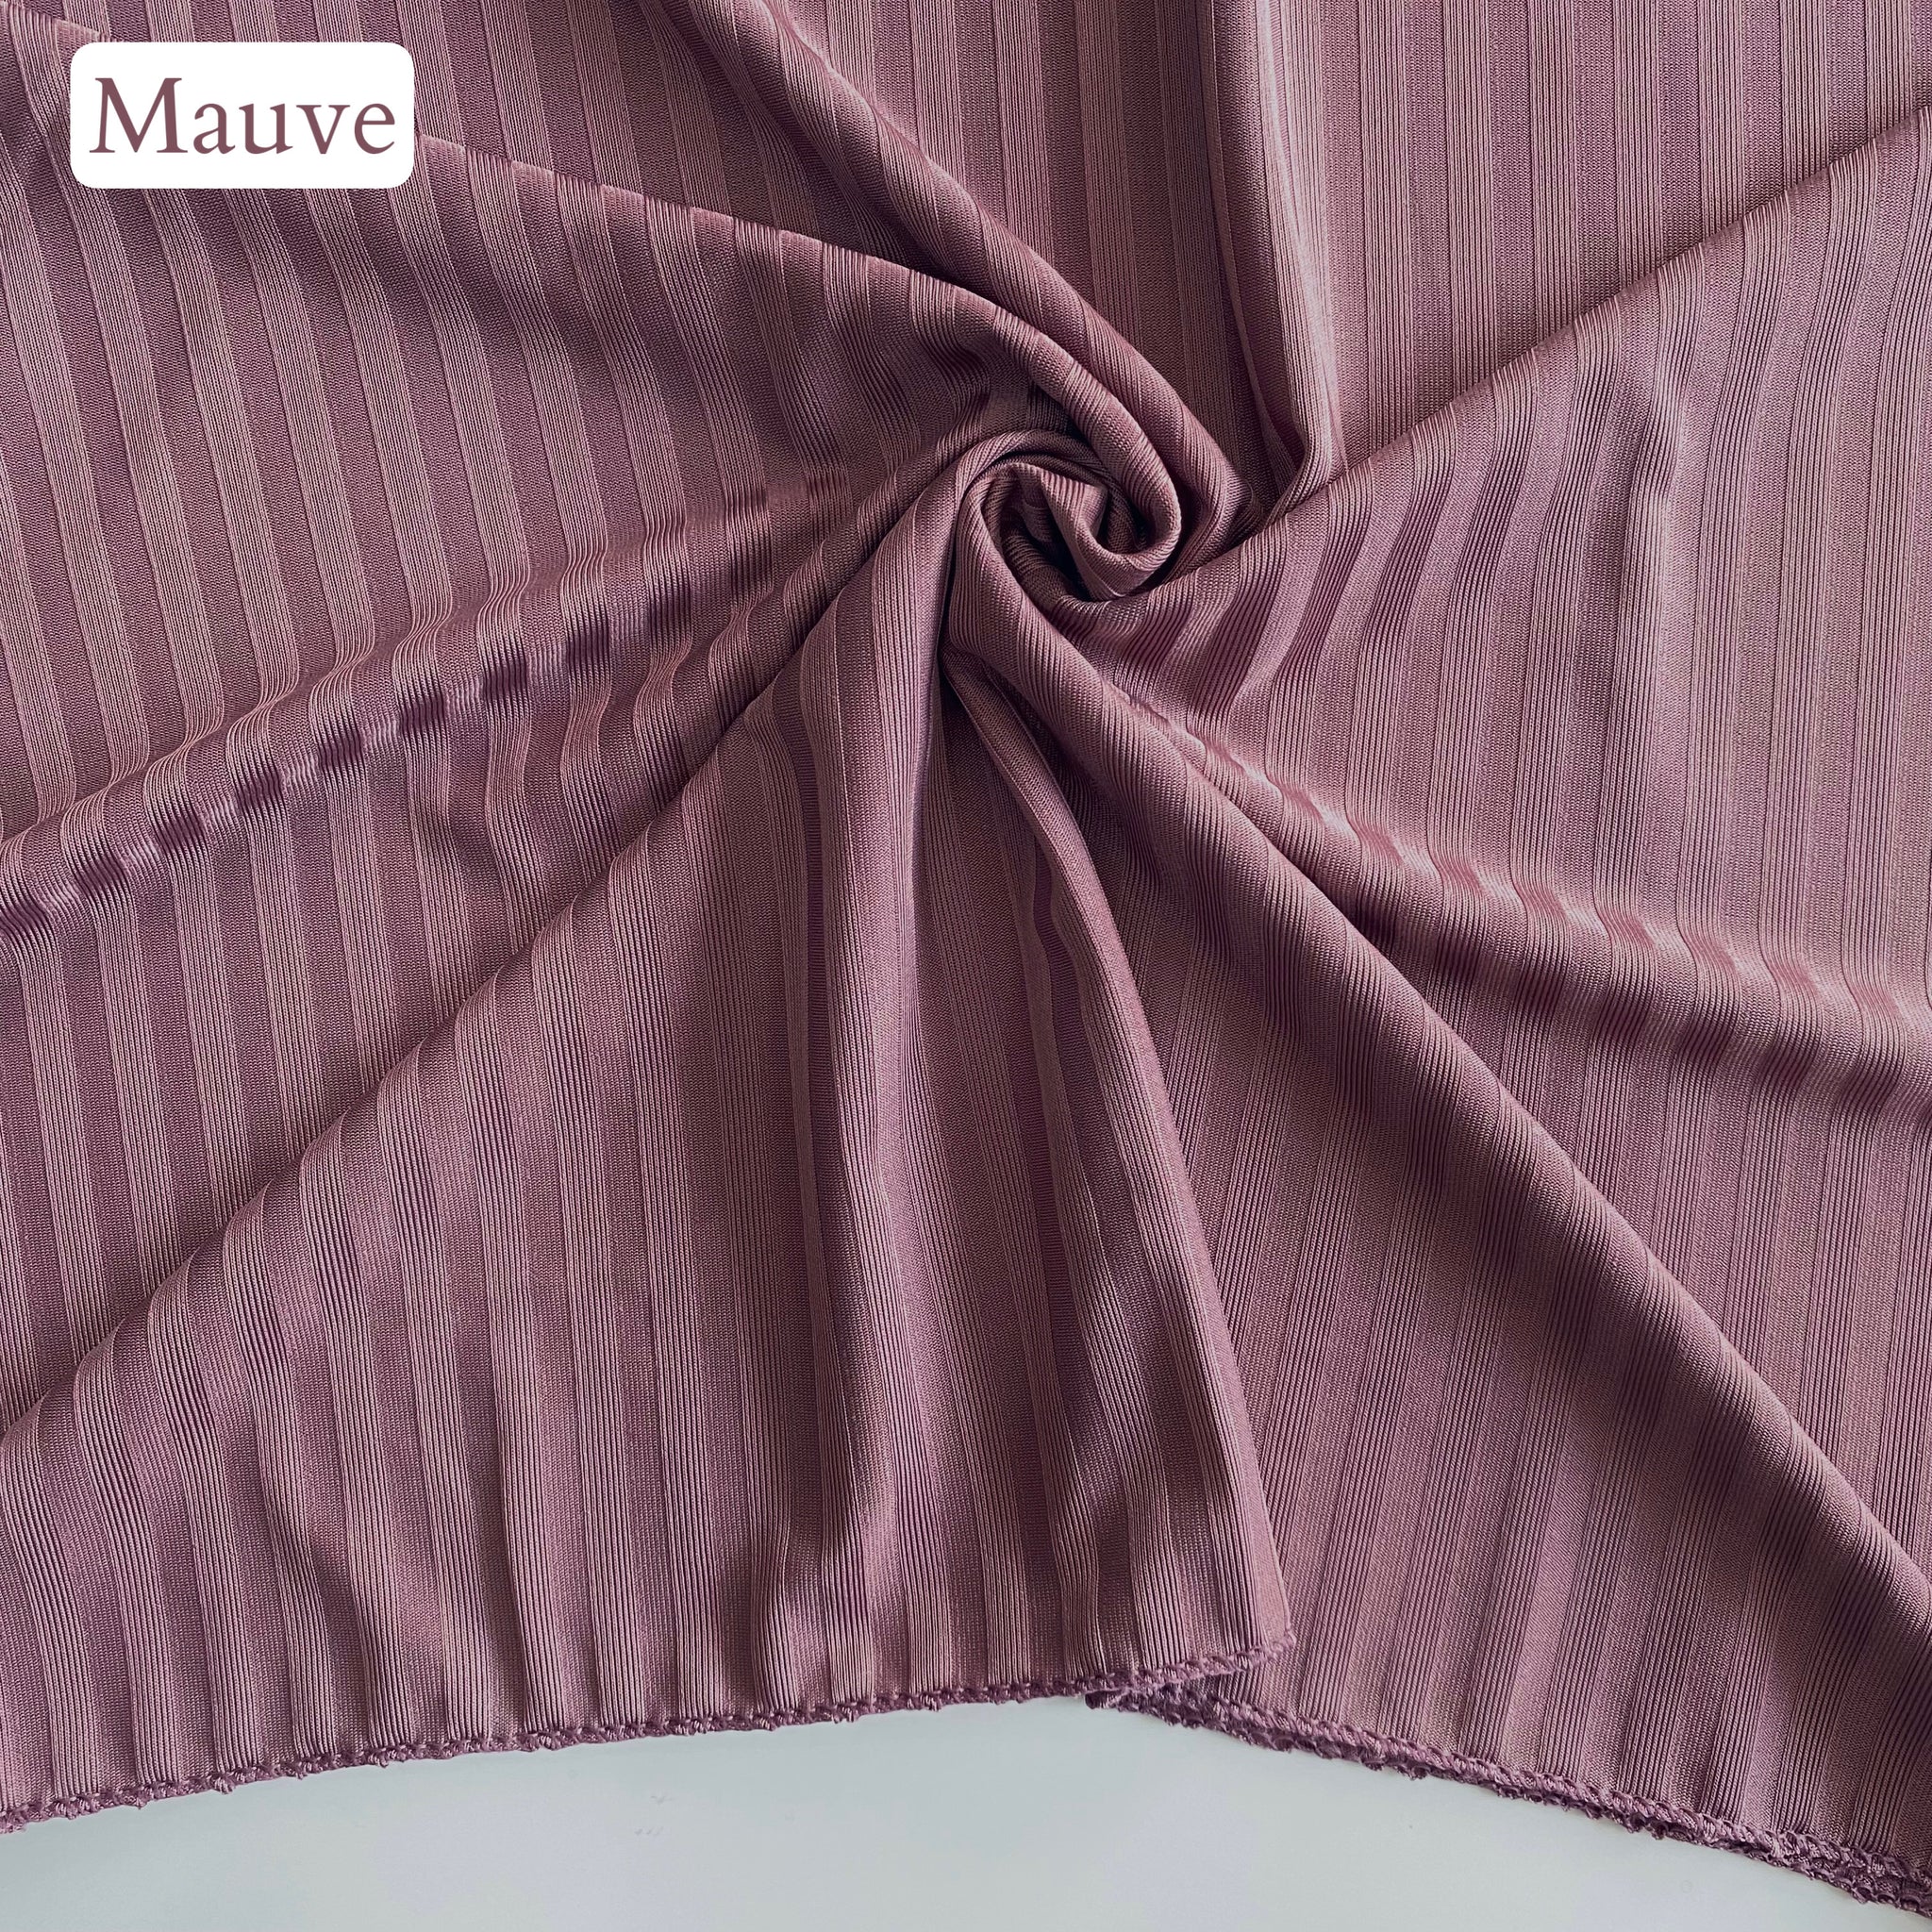 Parallel Striped Jersey Hijabs - Mauve